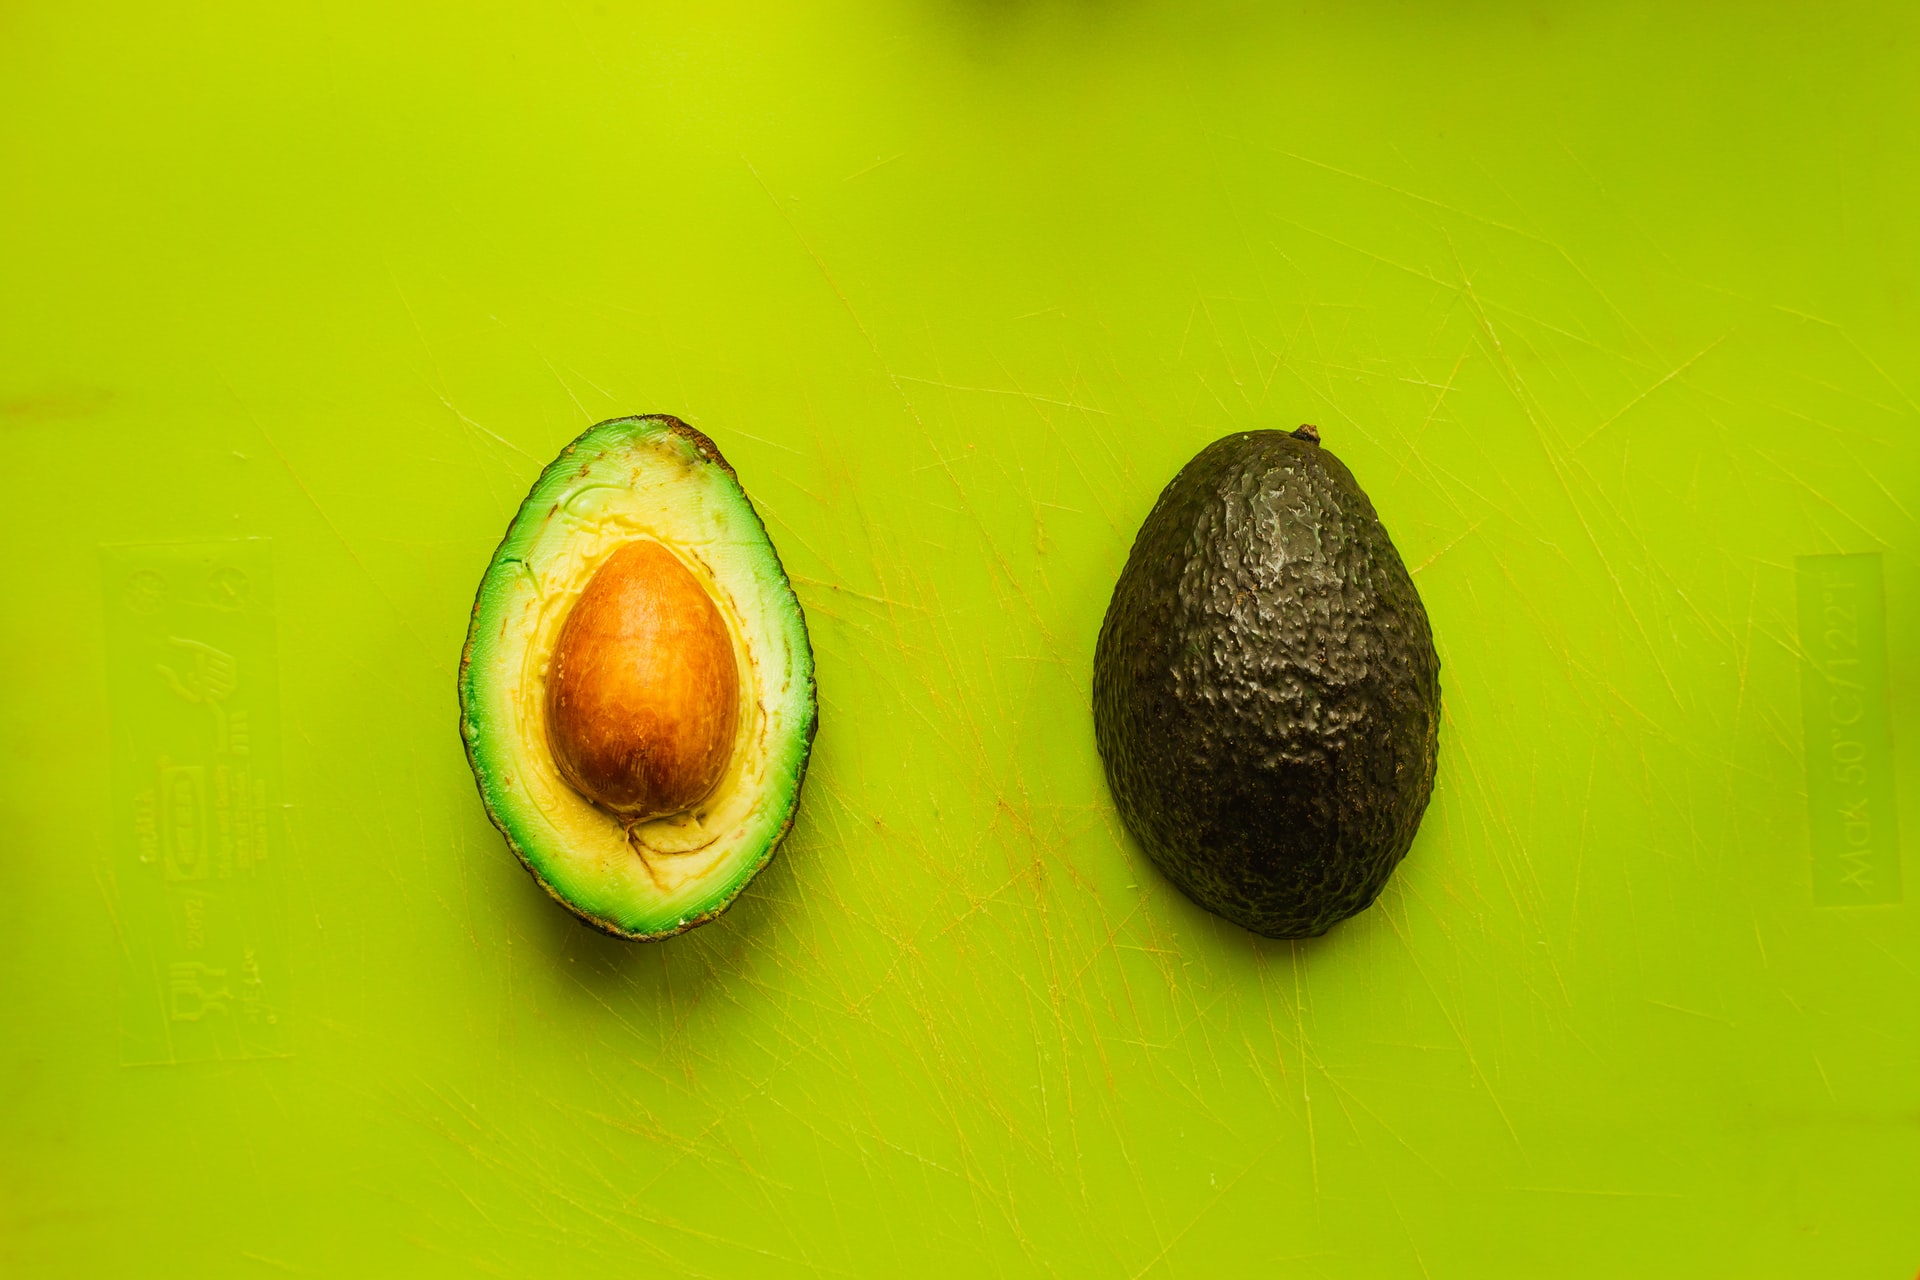 How to Plant Your First Avocado During Quarantine 10